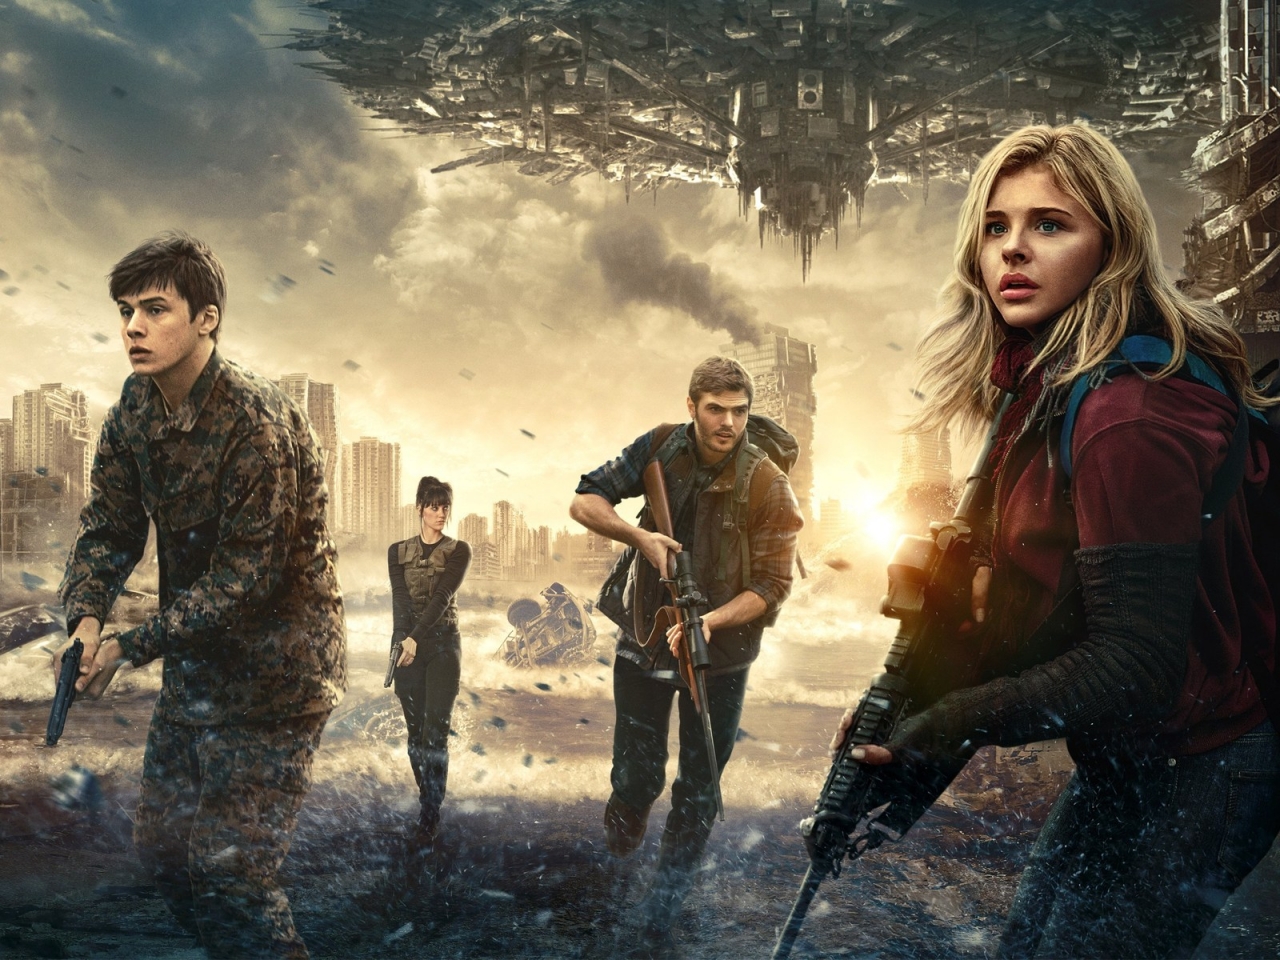 The 5th Wave Film 2016 for 1280 x 960 resolution